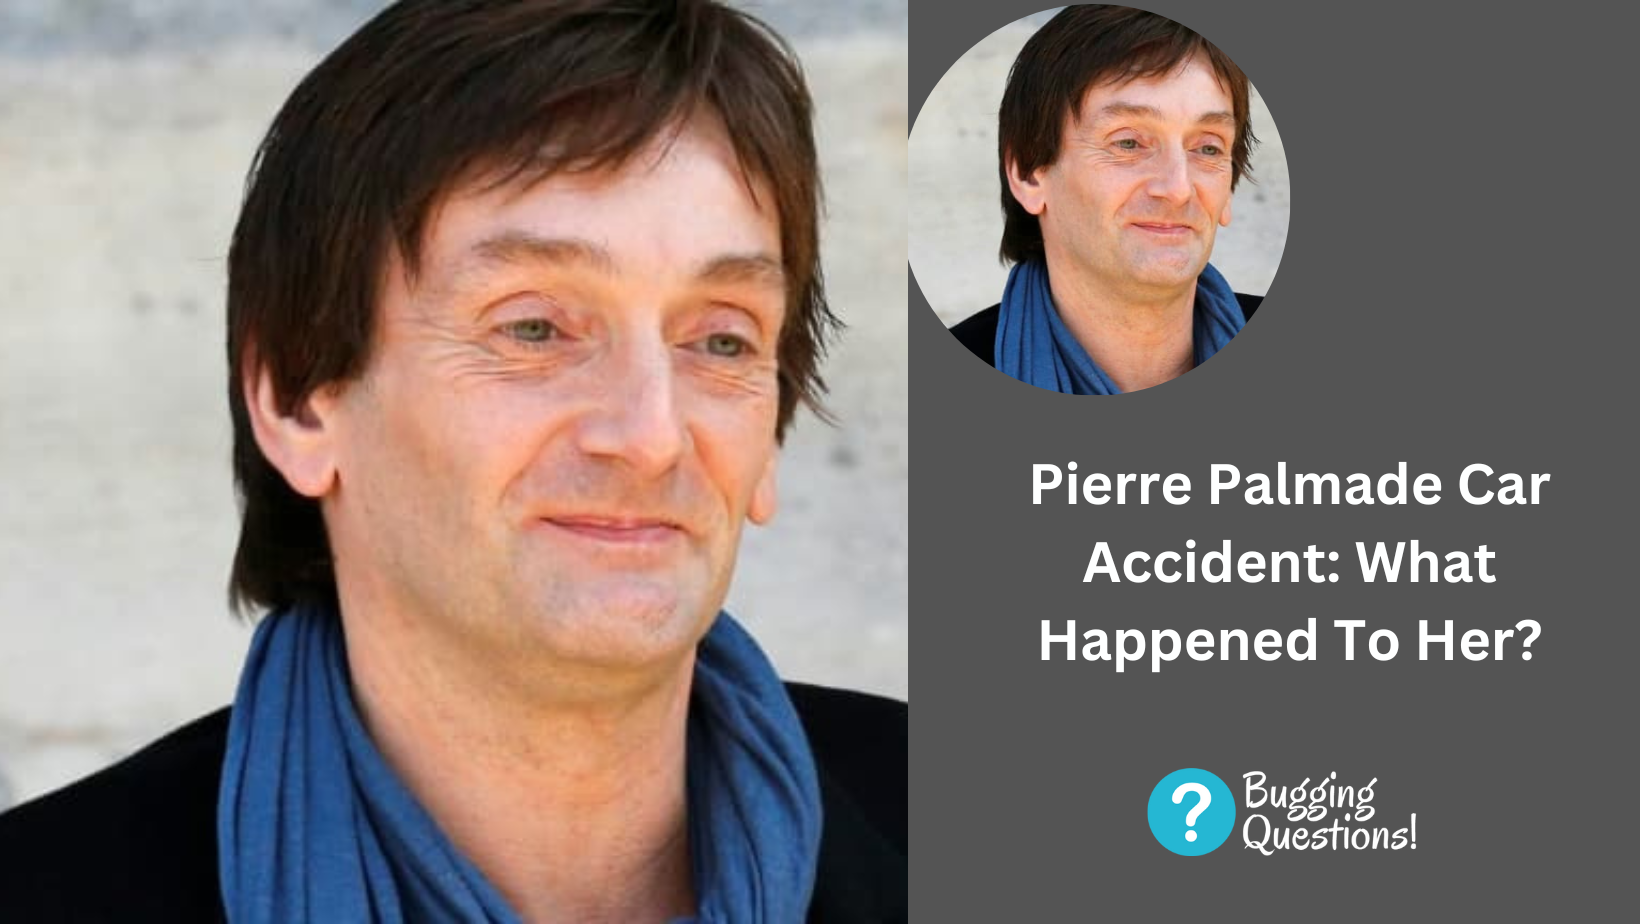 Pierre Palmade Car Accident: What Happened To Her?